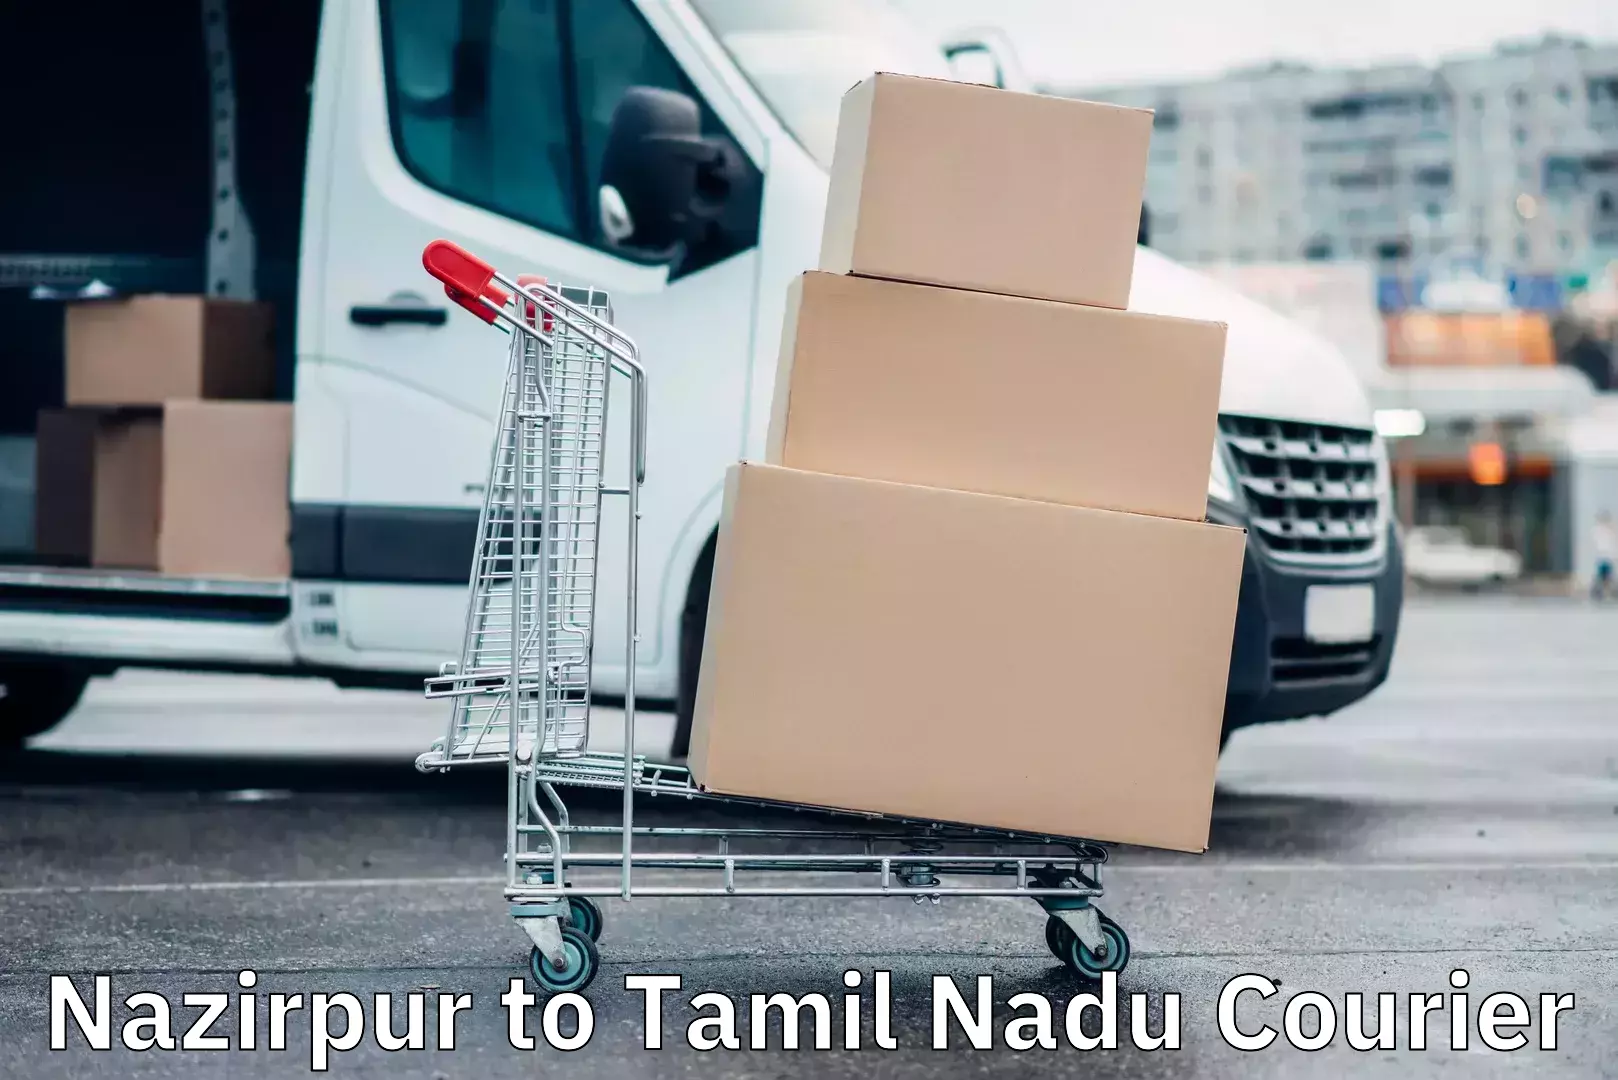 Round-the-clock parcel delivery Nazirpur to Hosur